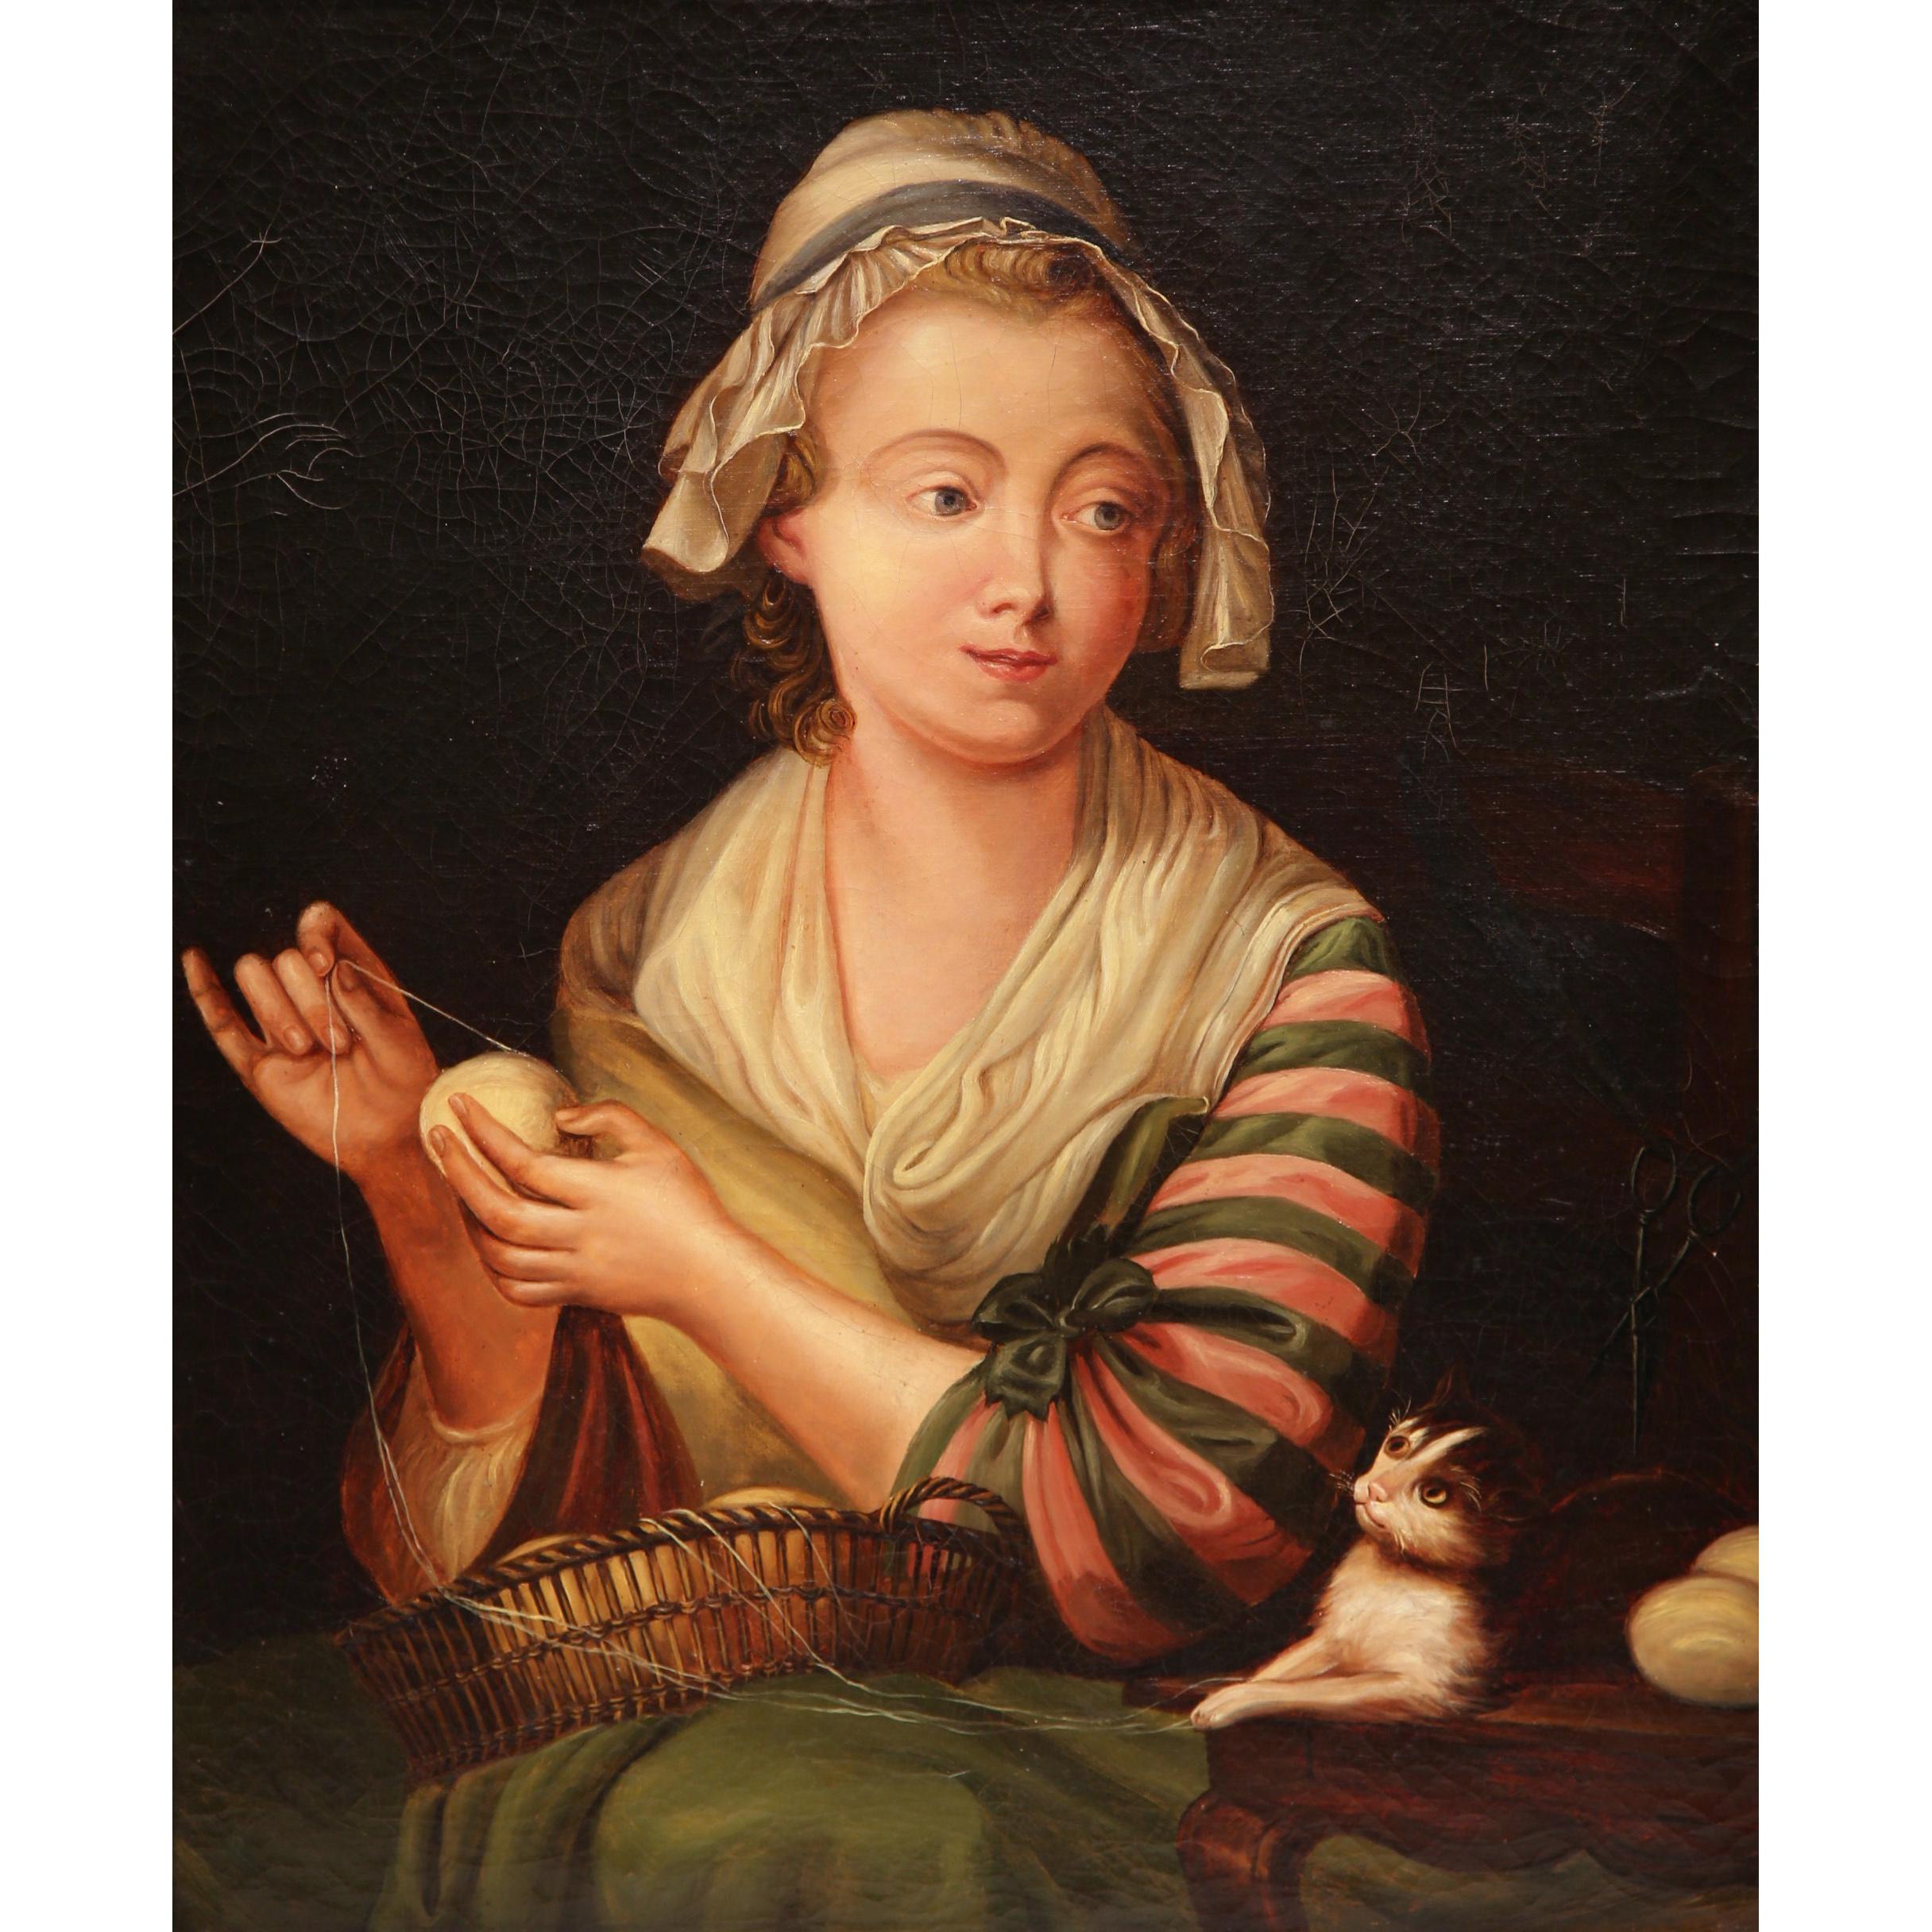 This beautiful antique painting was created in France, circa 1810. Set in the original carved gilt frame, the artwork depicts a young woman knitting with a small cat beside her. In the manner of Jean Baptiste Greuze (see: 